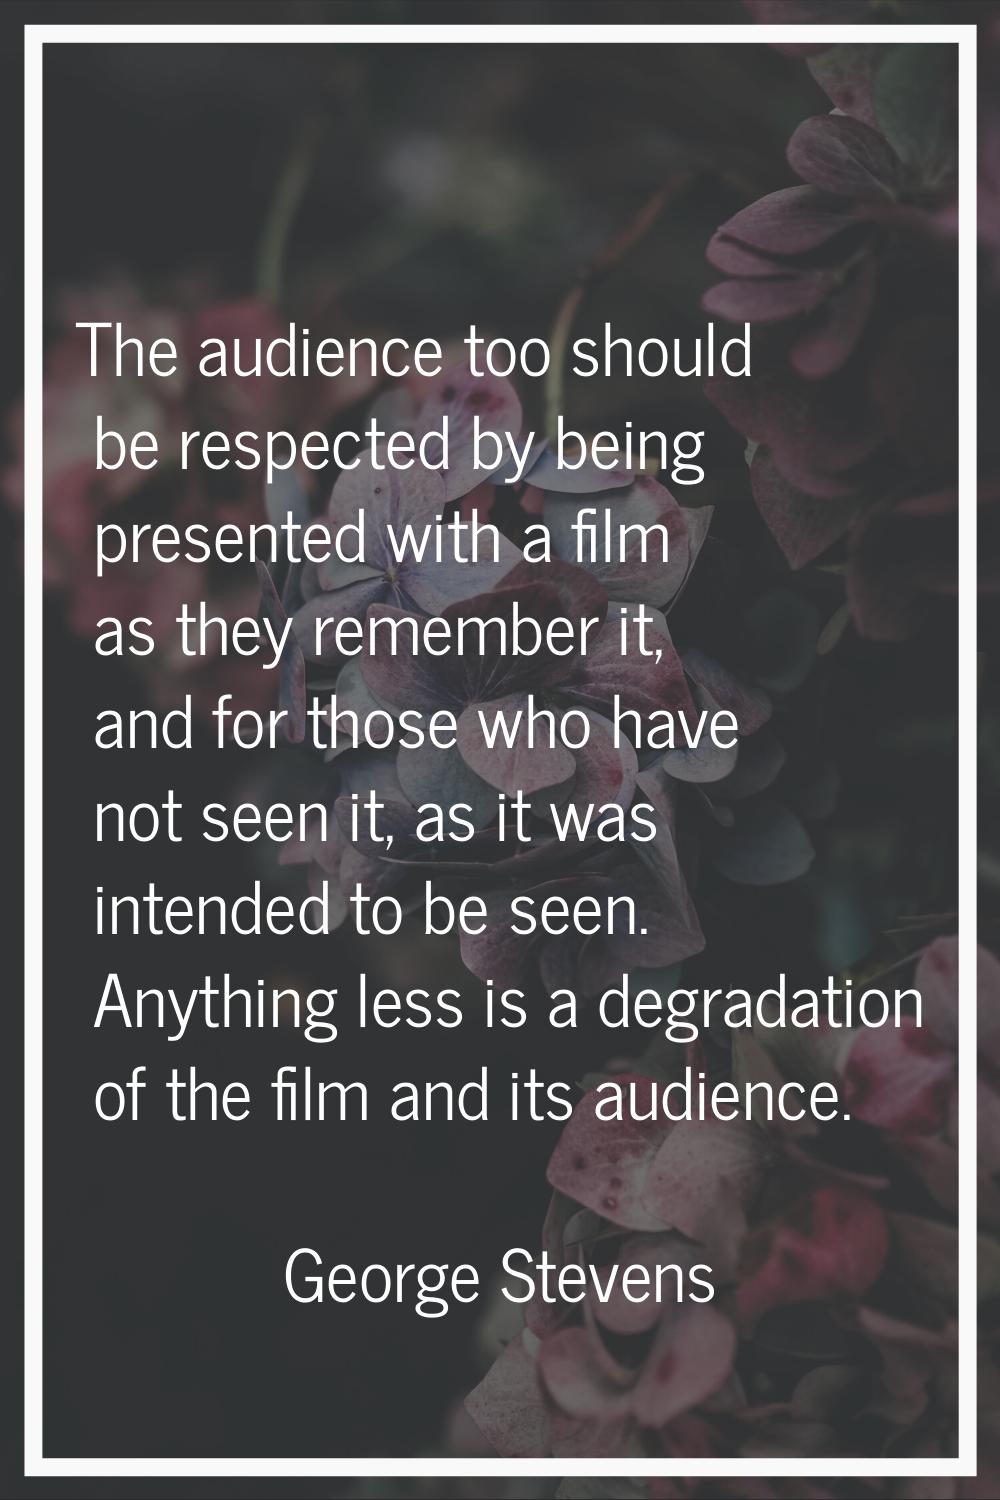 The audience too should be respected by being presented with a film as they remember it, and for th